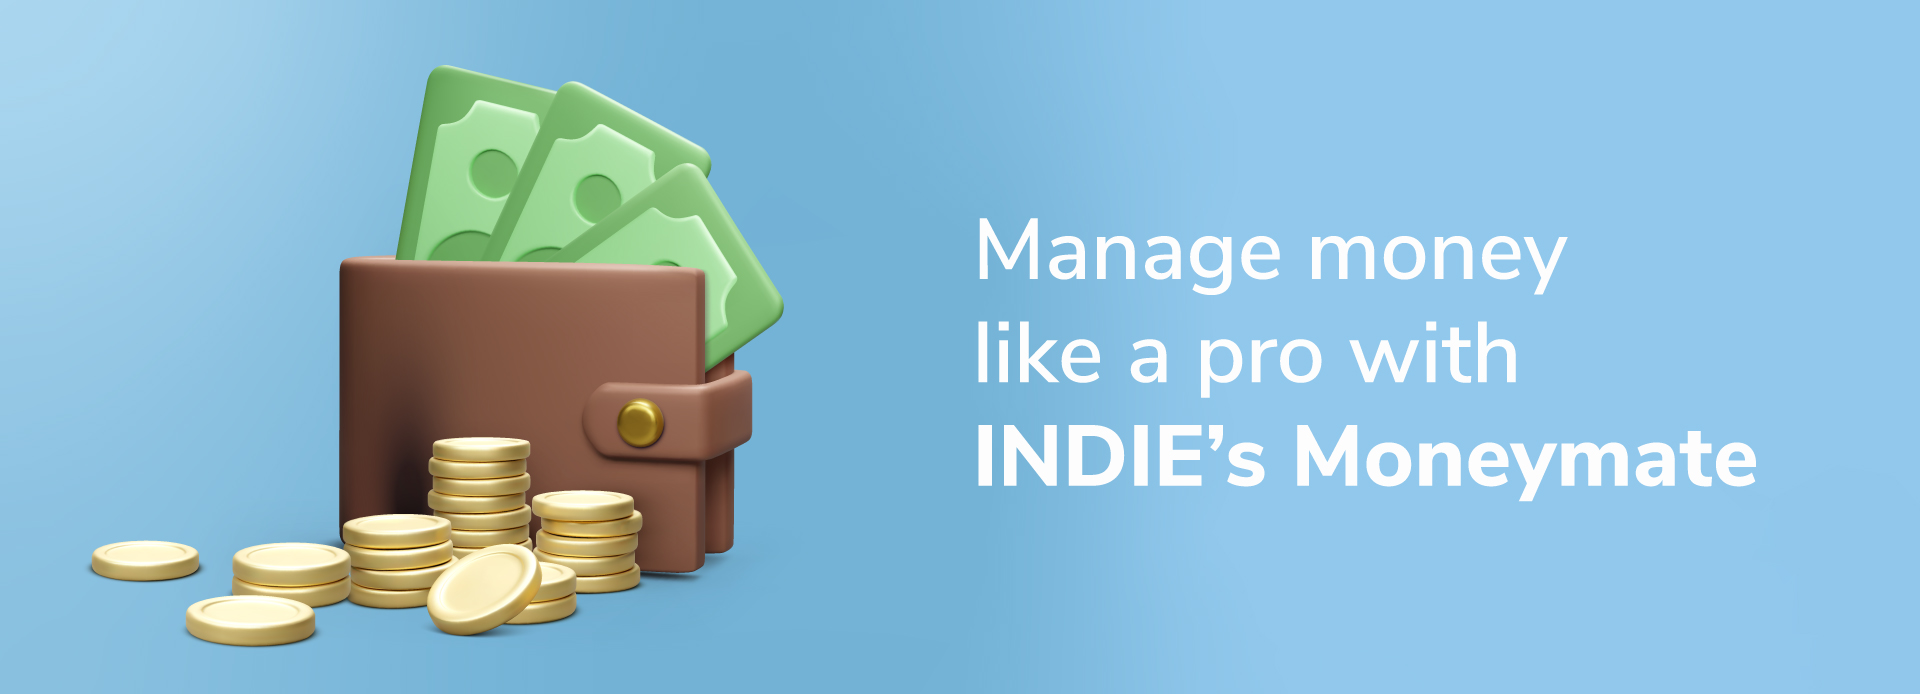 How to manage money like a pro with MoneyMate by INDIE